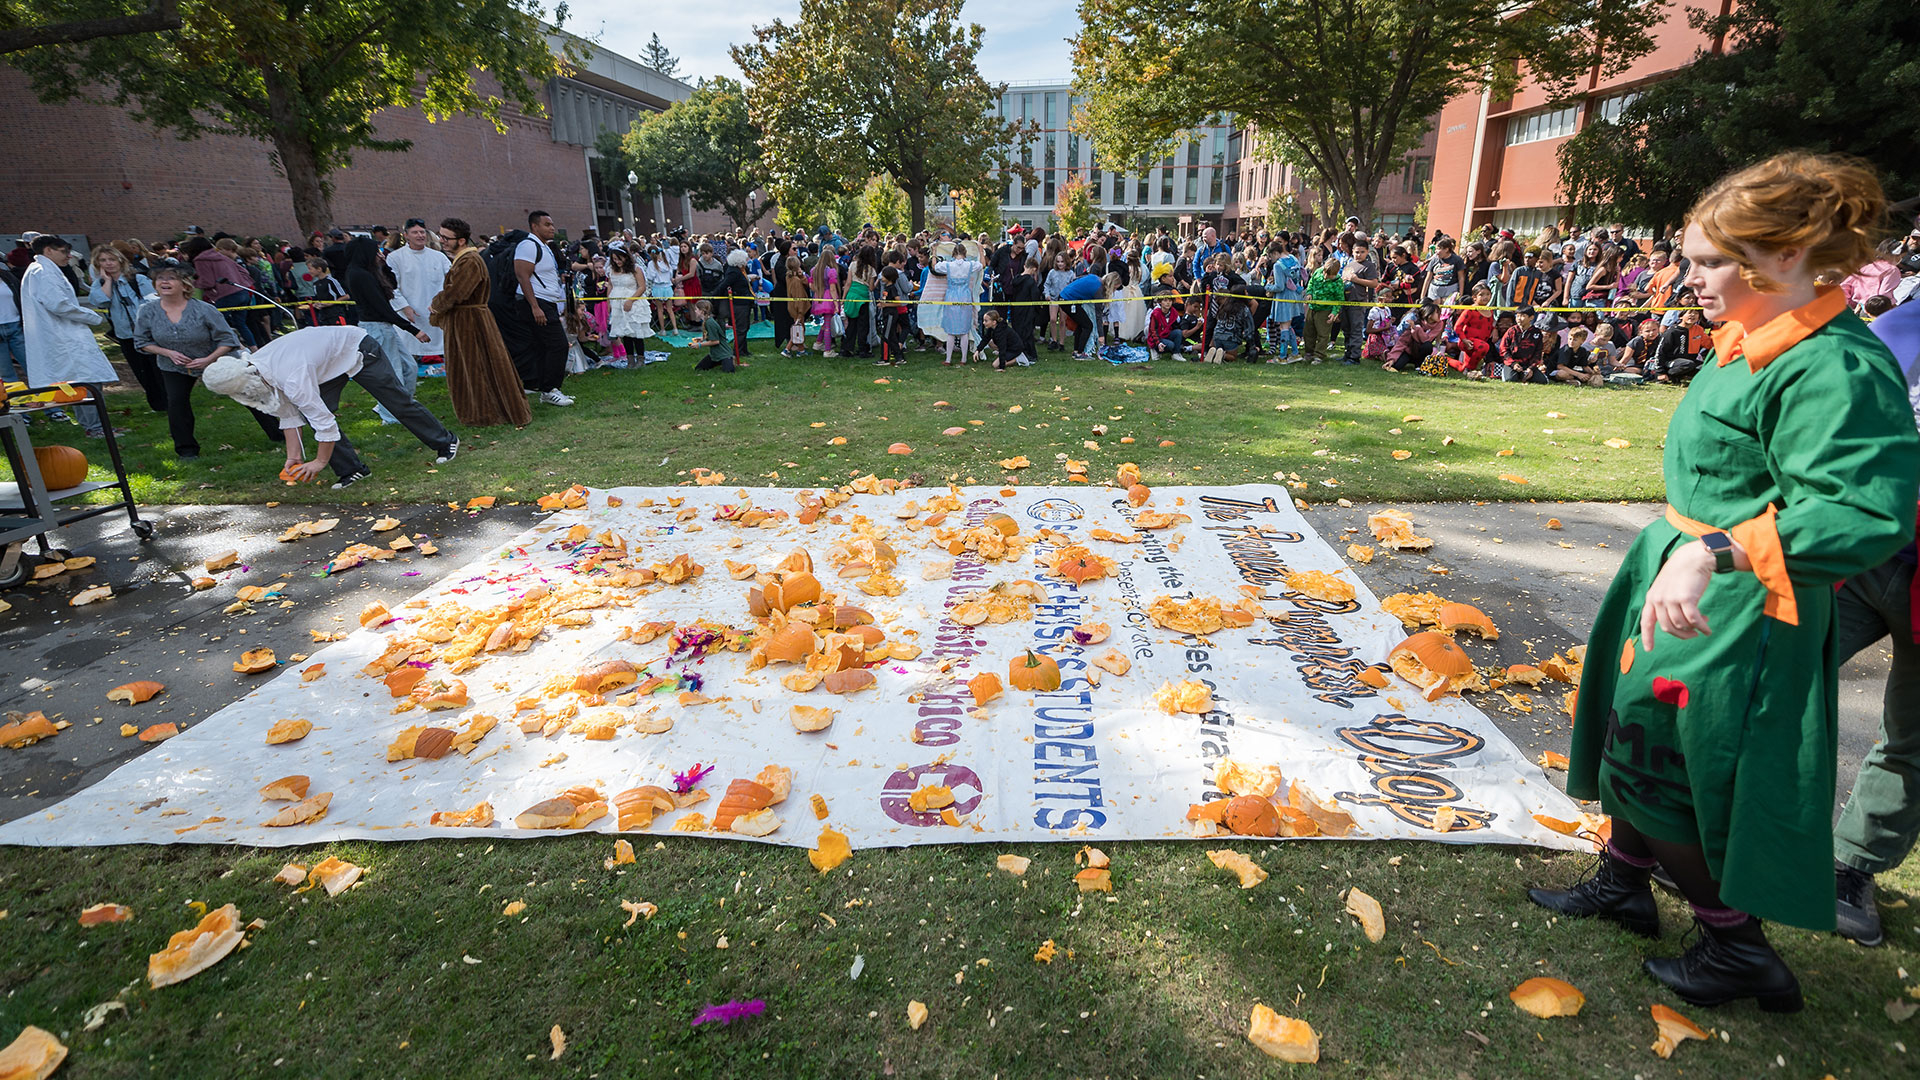 Physics faculty Kendall Hall portrays Ms. Frizzle (right) looks over the smashed pumpkins as local elementary school students watch the Society of Physics students drop pumpkins from a lift during the Annual SPS Pumpkin drop on Monday, October 31, 2022.
